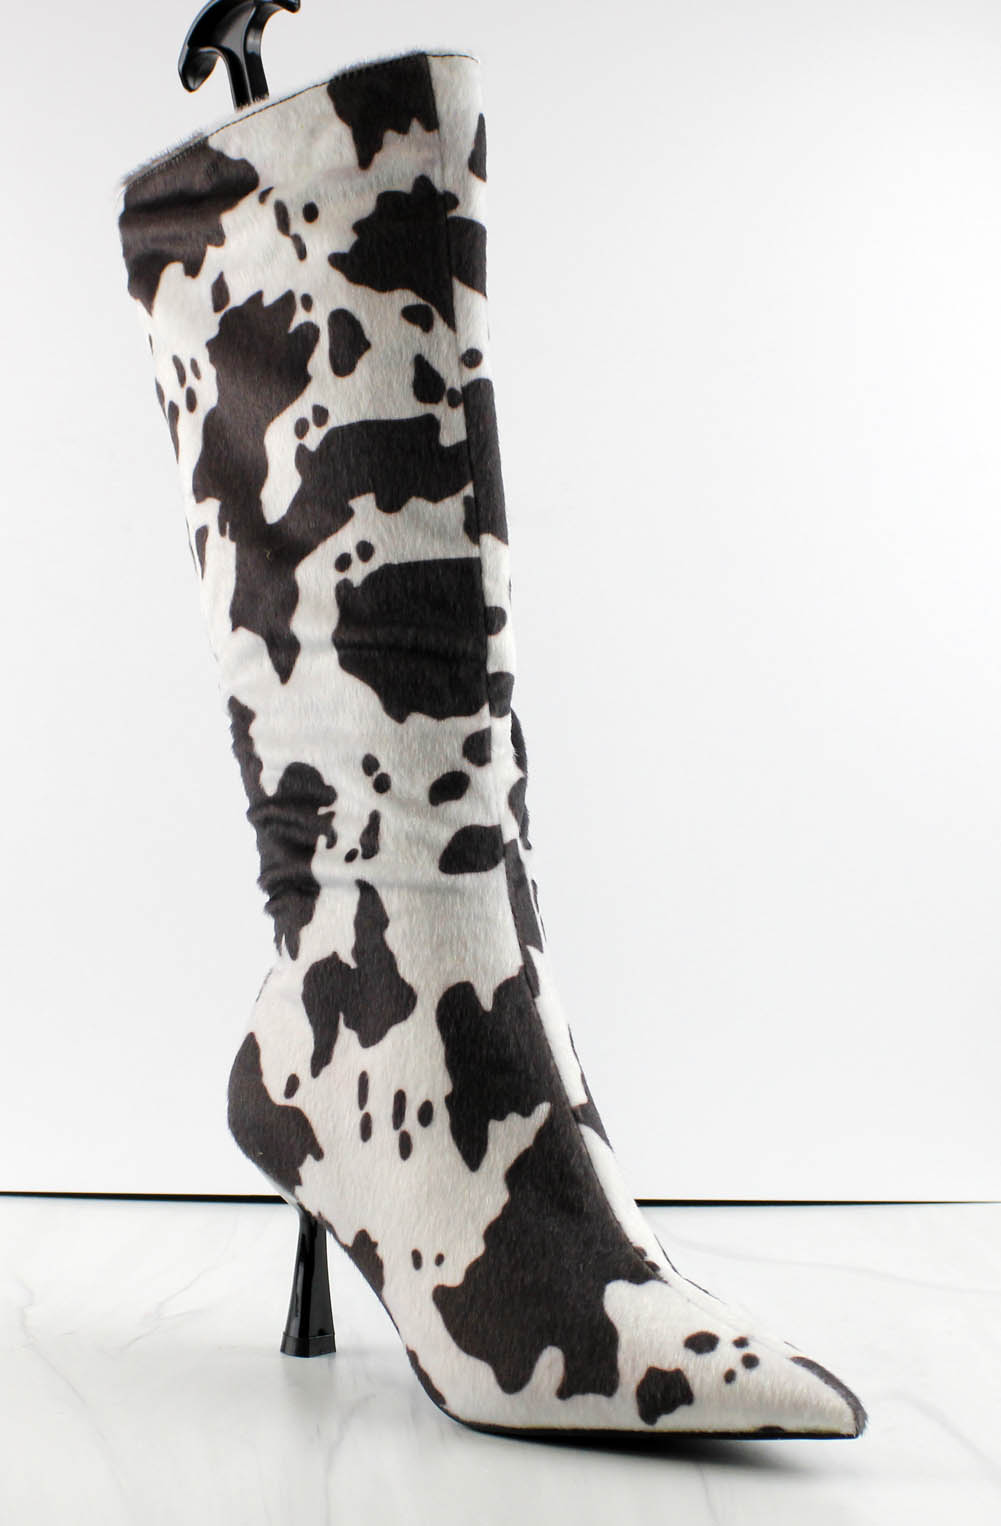 cow print knee high boots